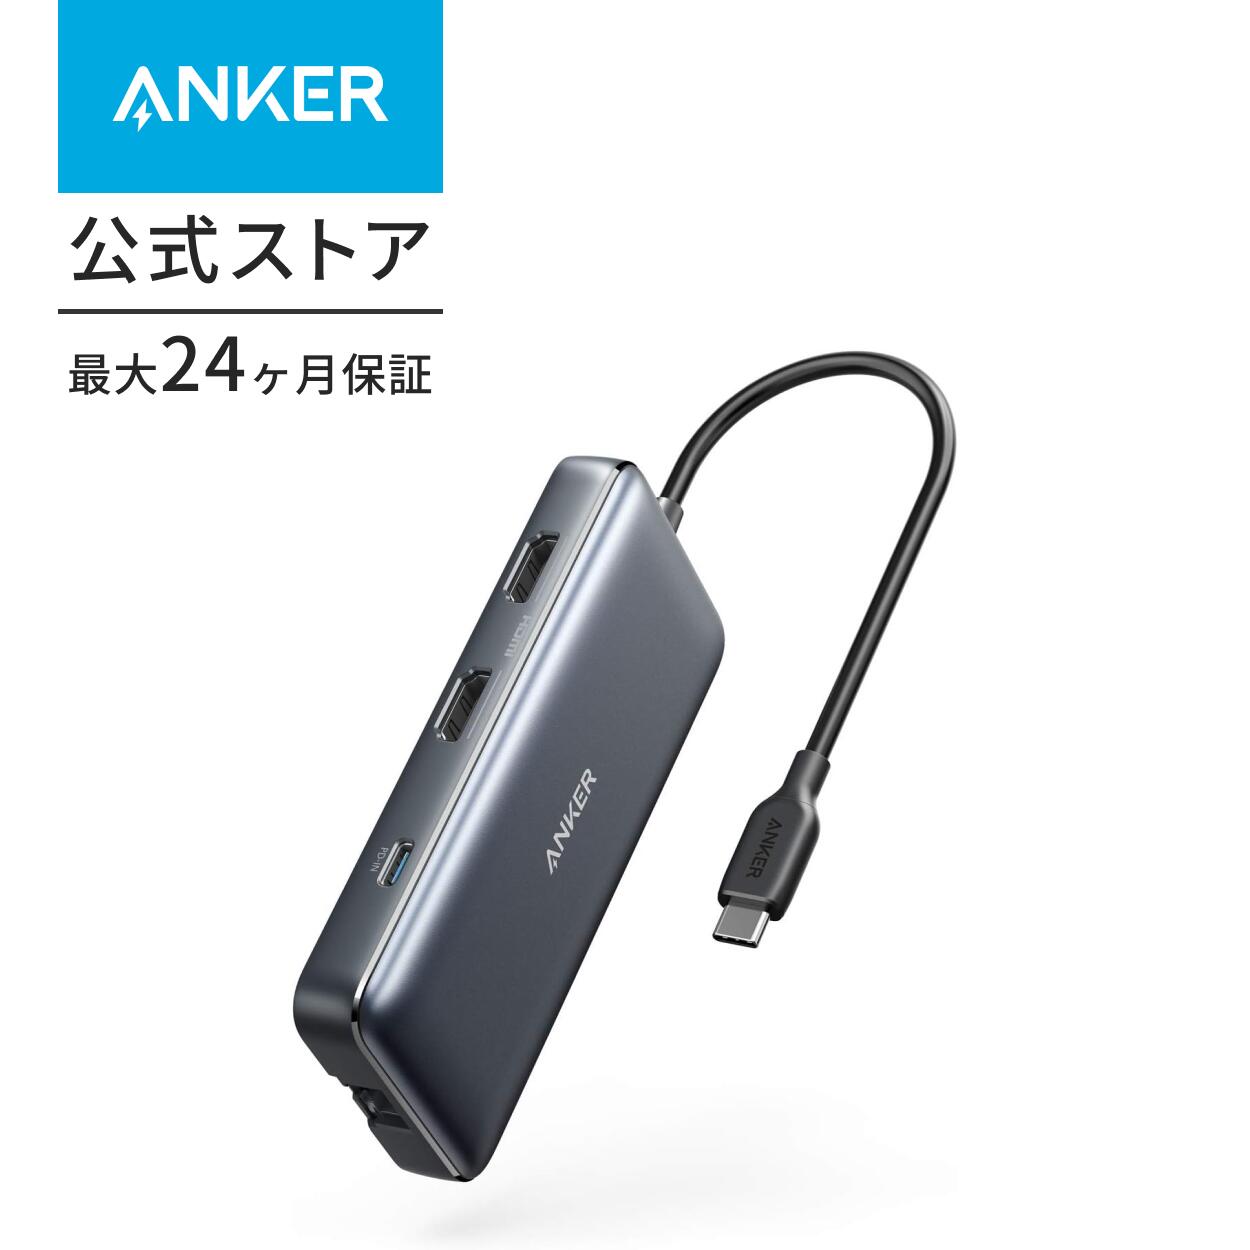 Anker PowerExpand 8-in-1 USB-C